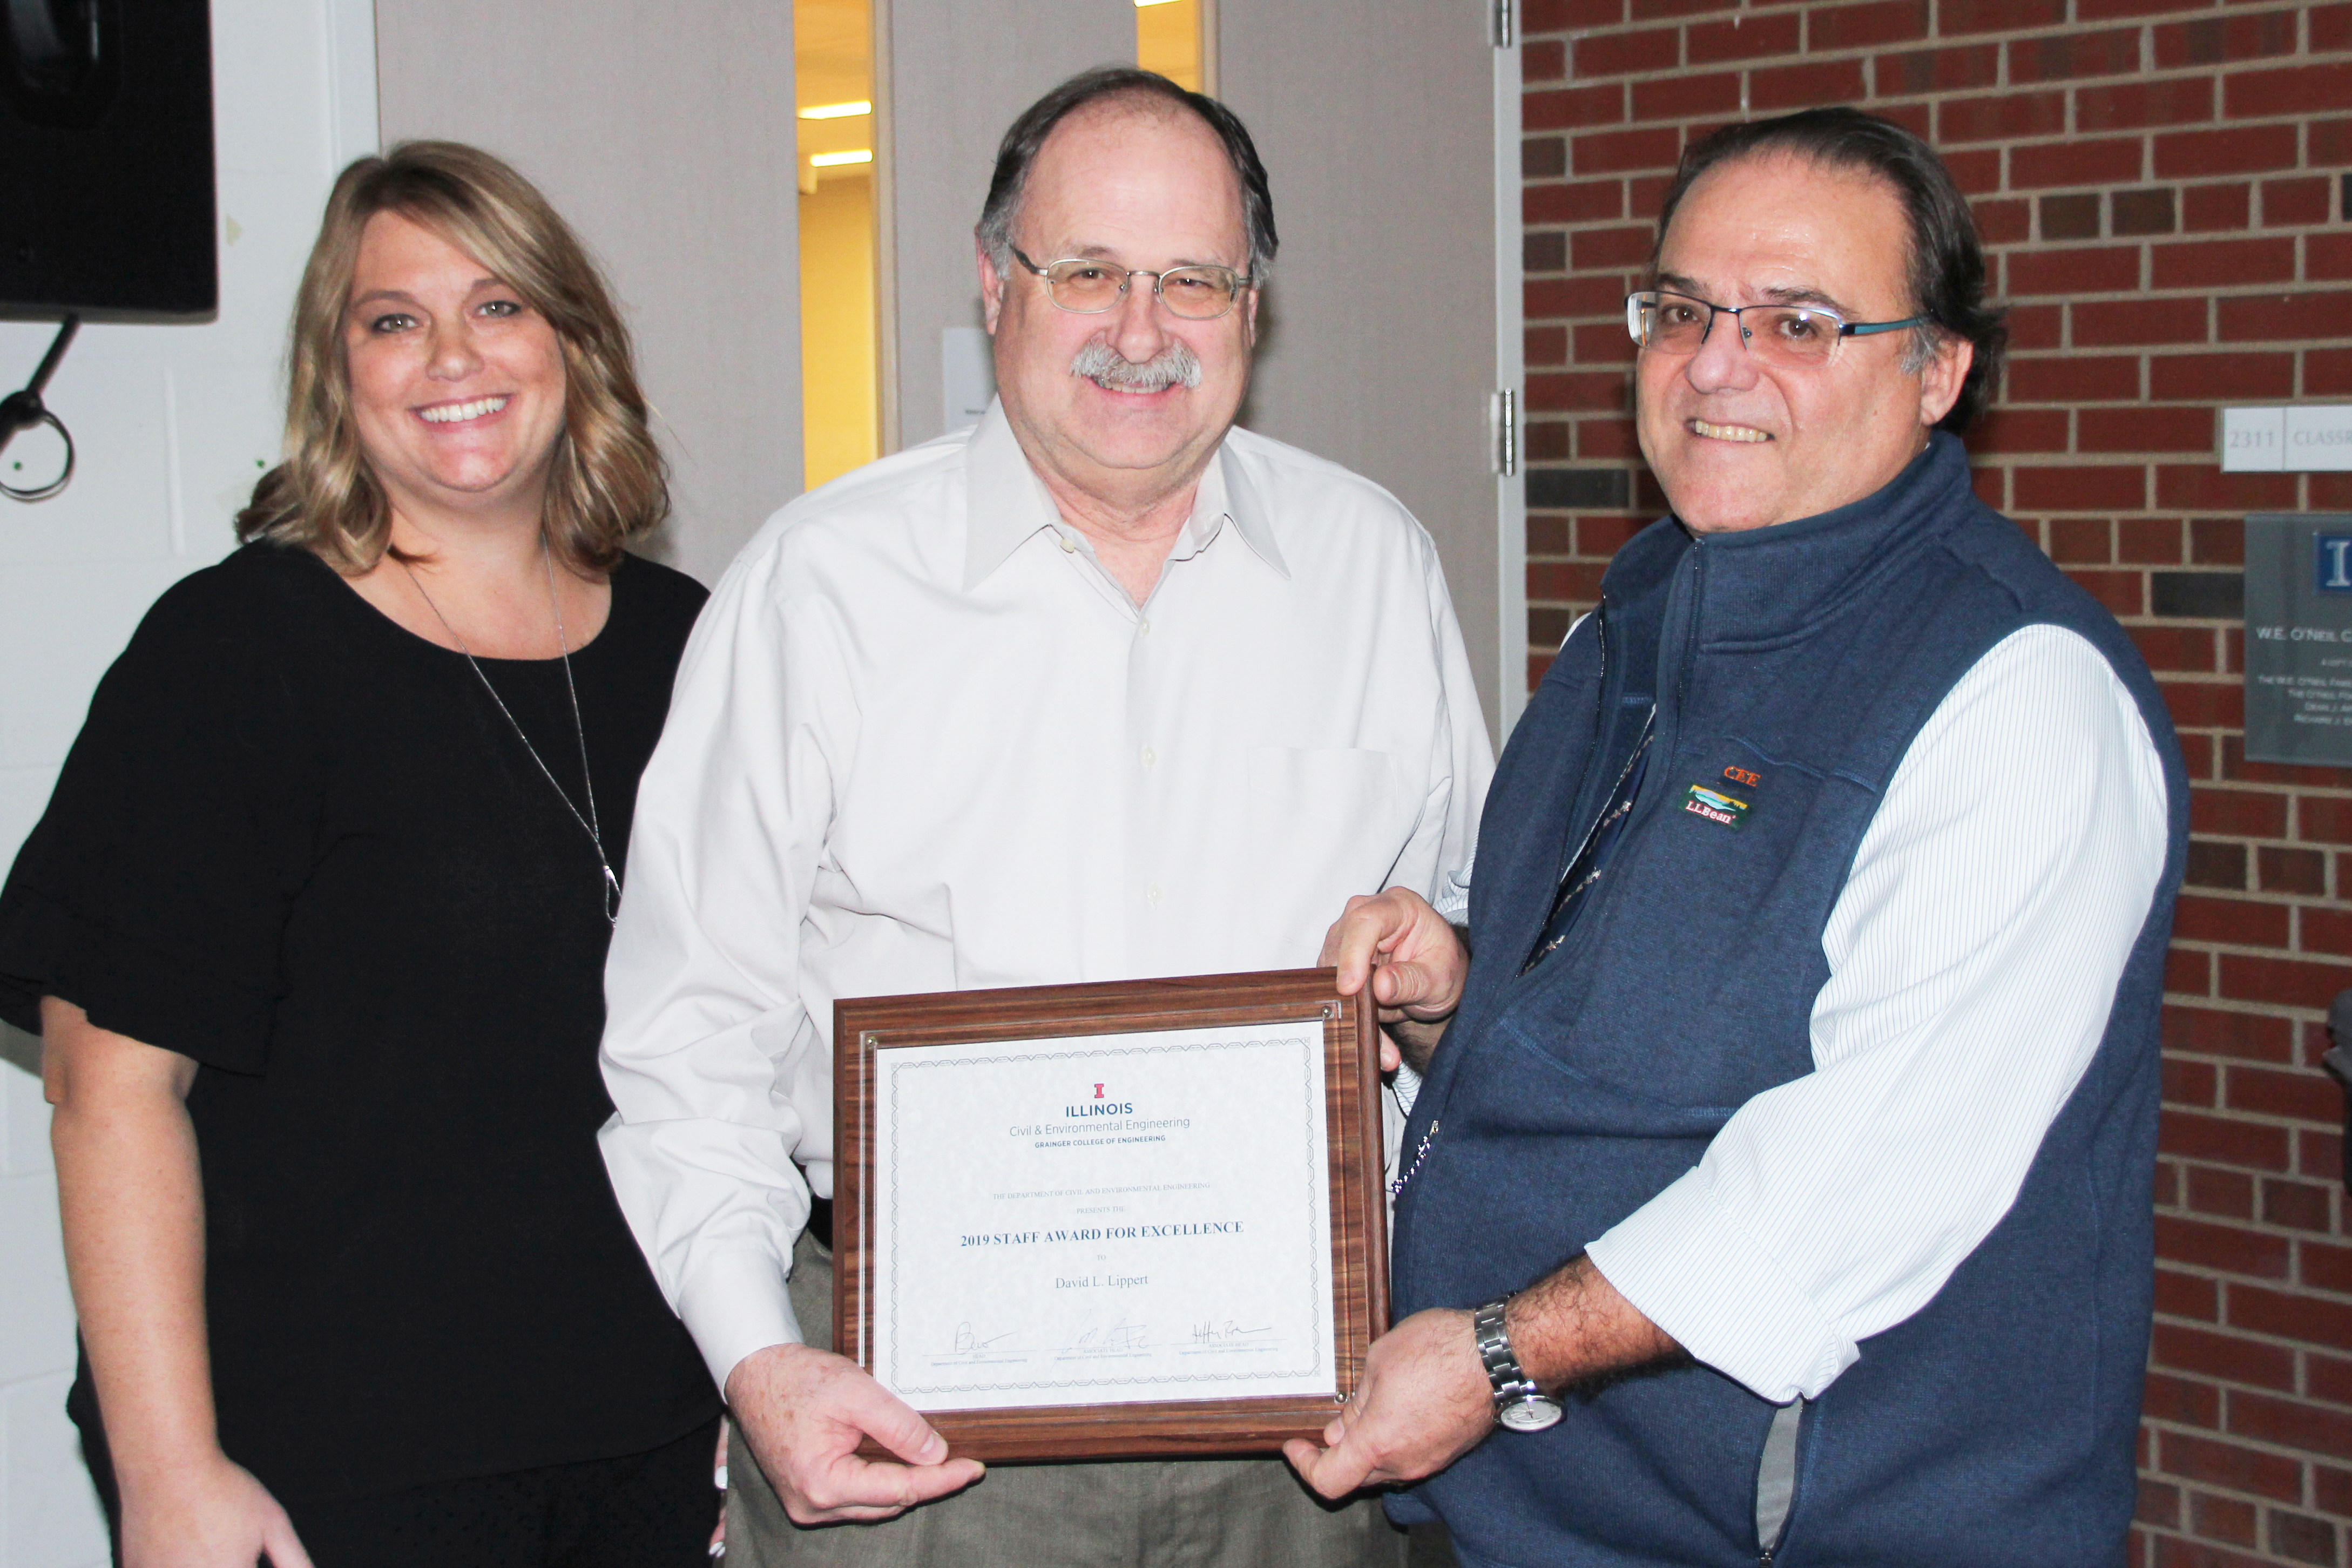 David Lippert, middle, ICT&rsquo;s senior sustainability implementation engineer, was all smiles earlier on Nov. 18, 2019, when awarded the Staff Award for Excellence by Kristi Anderson, left, ICT&rsquo;s senior financial operations manager, and Benito Mari&ntilde;as, CEE&rsquo;s former department head, at the M.T. Geoffrey Yeh Student Center. &ldquo;David is very well respected for his sense of devotion and commitment to his career,&rdquo; said Imad Al-Qadi, ICT&rsquo;s director and UIUC CEE Bliss Professor of Engineering, who took part in nominating Lippert for the award. &ldquo;He is a distinguished engineer due to his high professional standards, ethics and humbleness in working with students, faculty and staff.&rdquo;